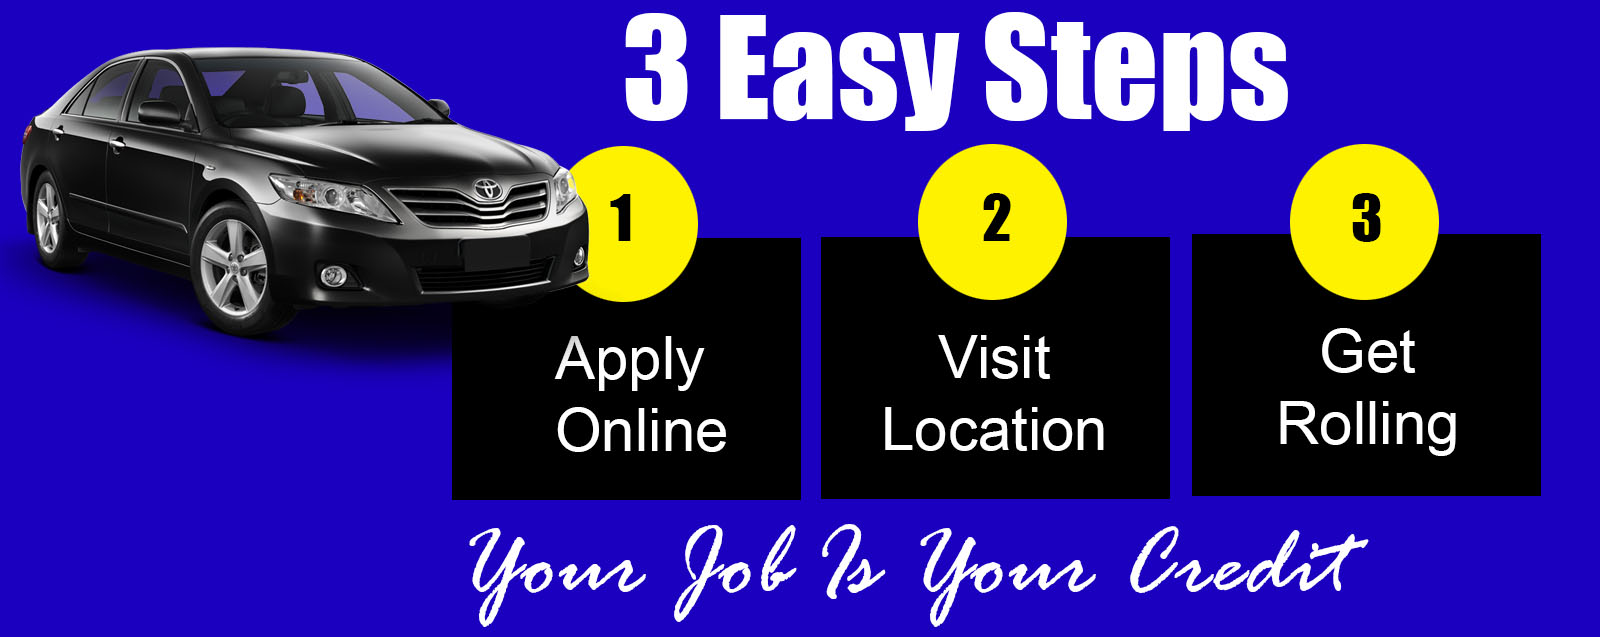 car dealers your job is your credit